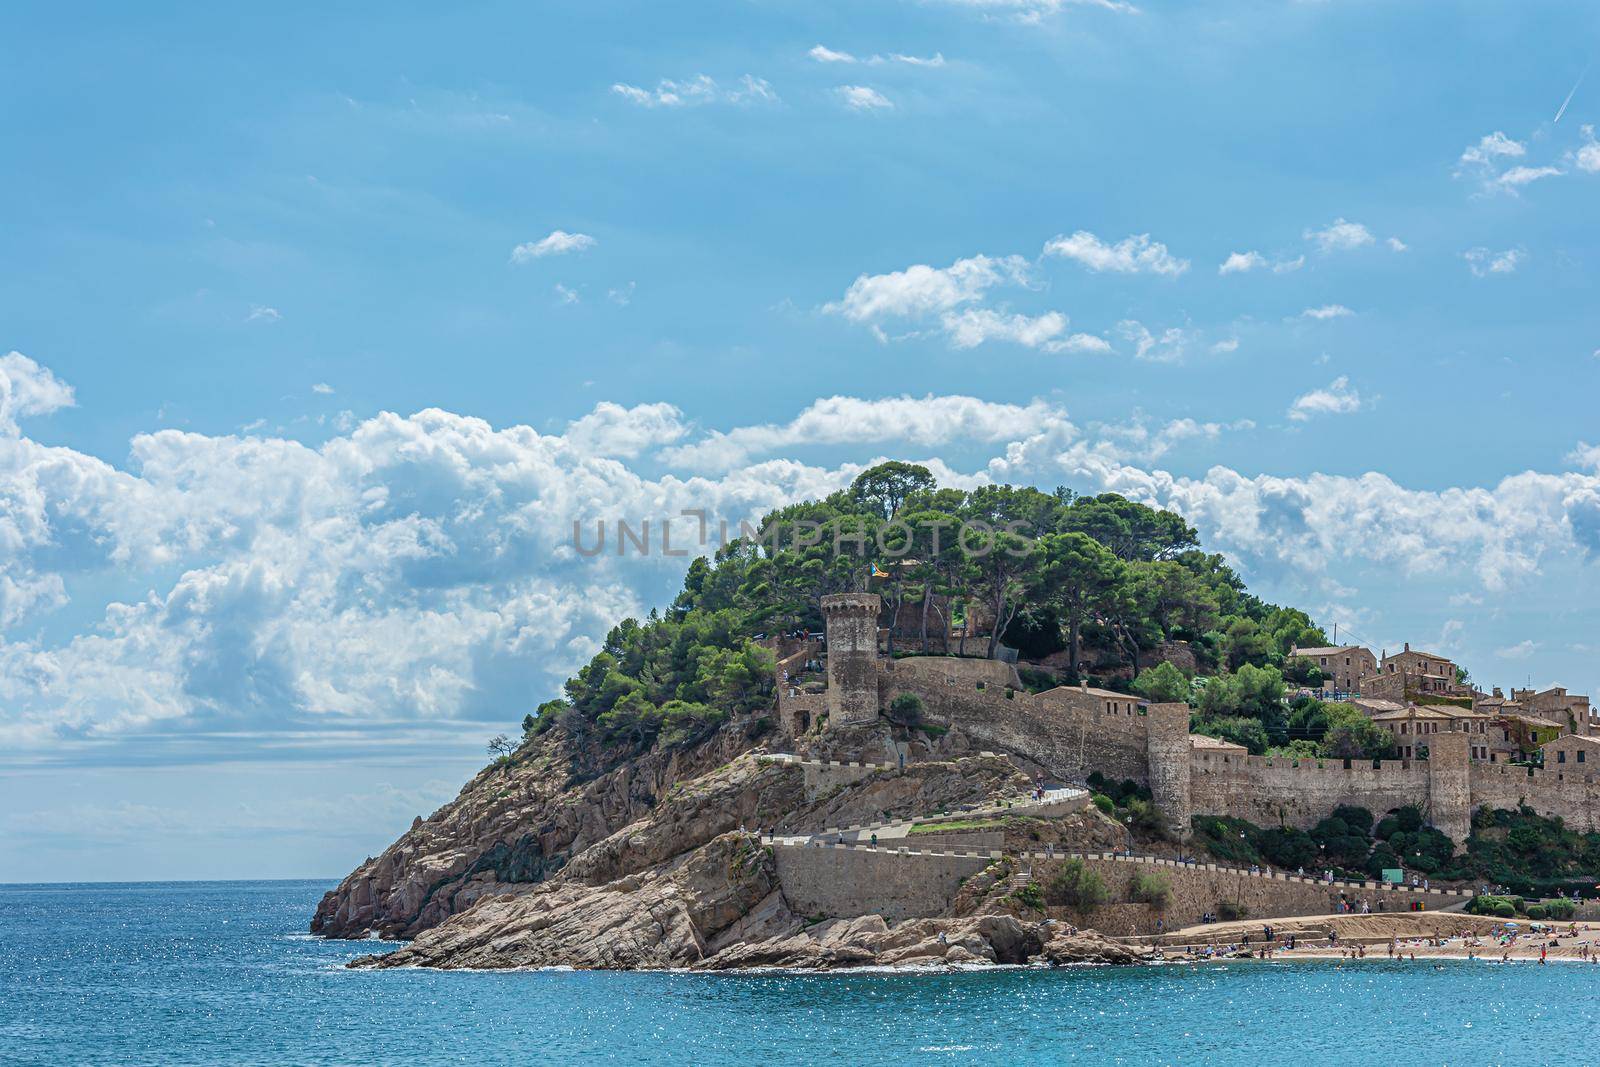 Tossa, Spain - 09/19/2017: the Old castle and fortress on the sea shore by Grommik